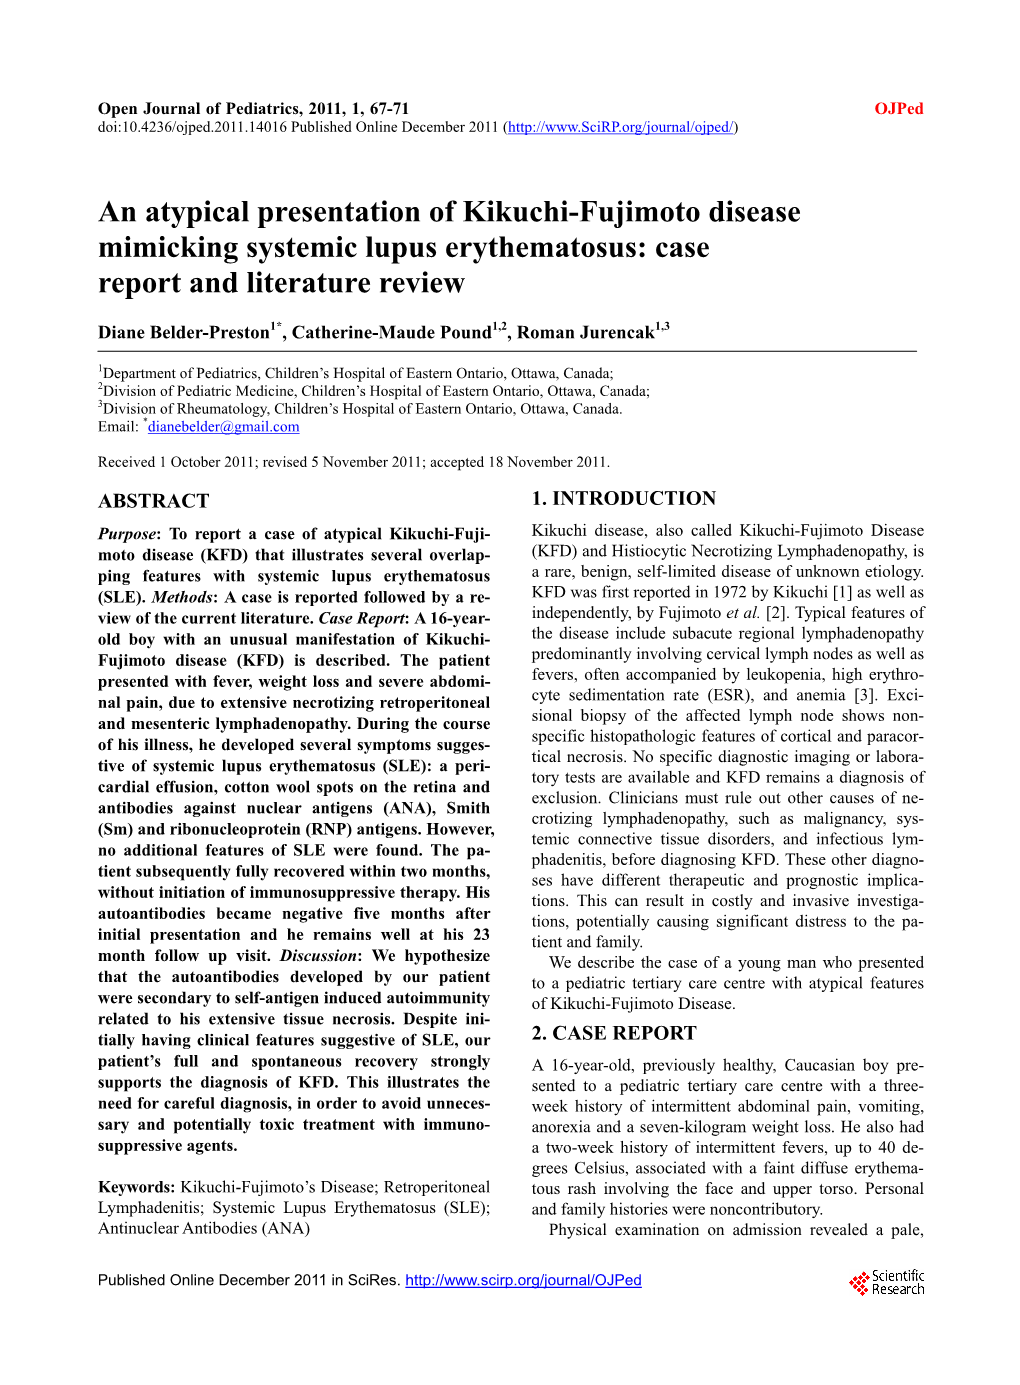 An Atypical Presentation of Kikuchi-Fujimoto Disease Mimicking Systemic Lupus Erythematosus: Case Report and Literature Review